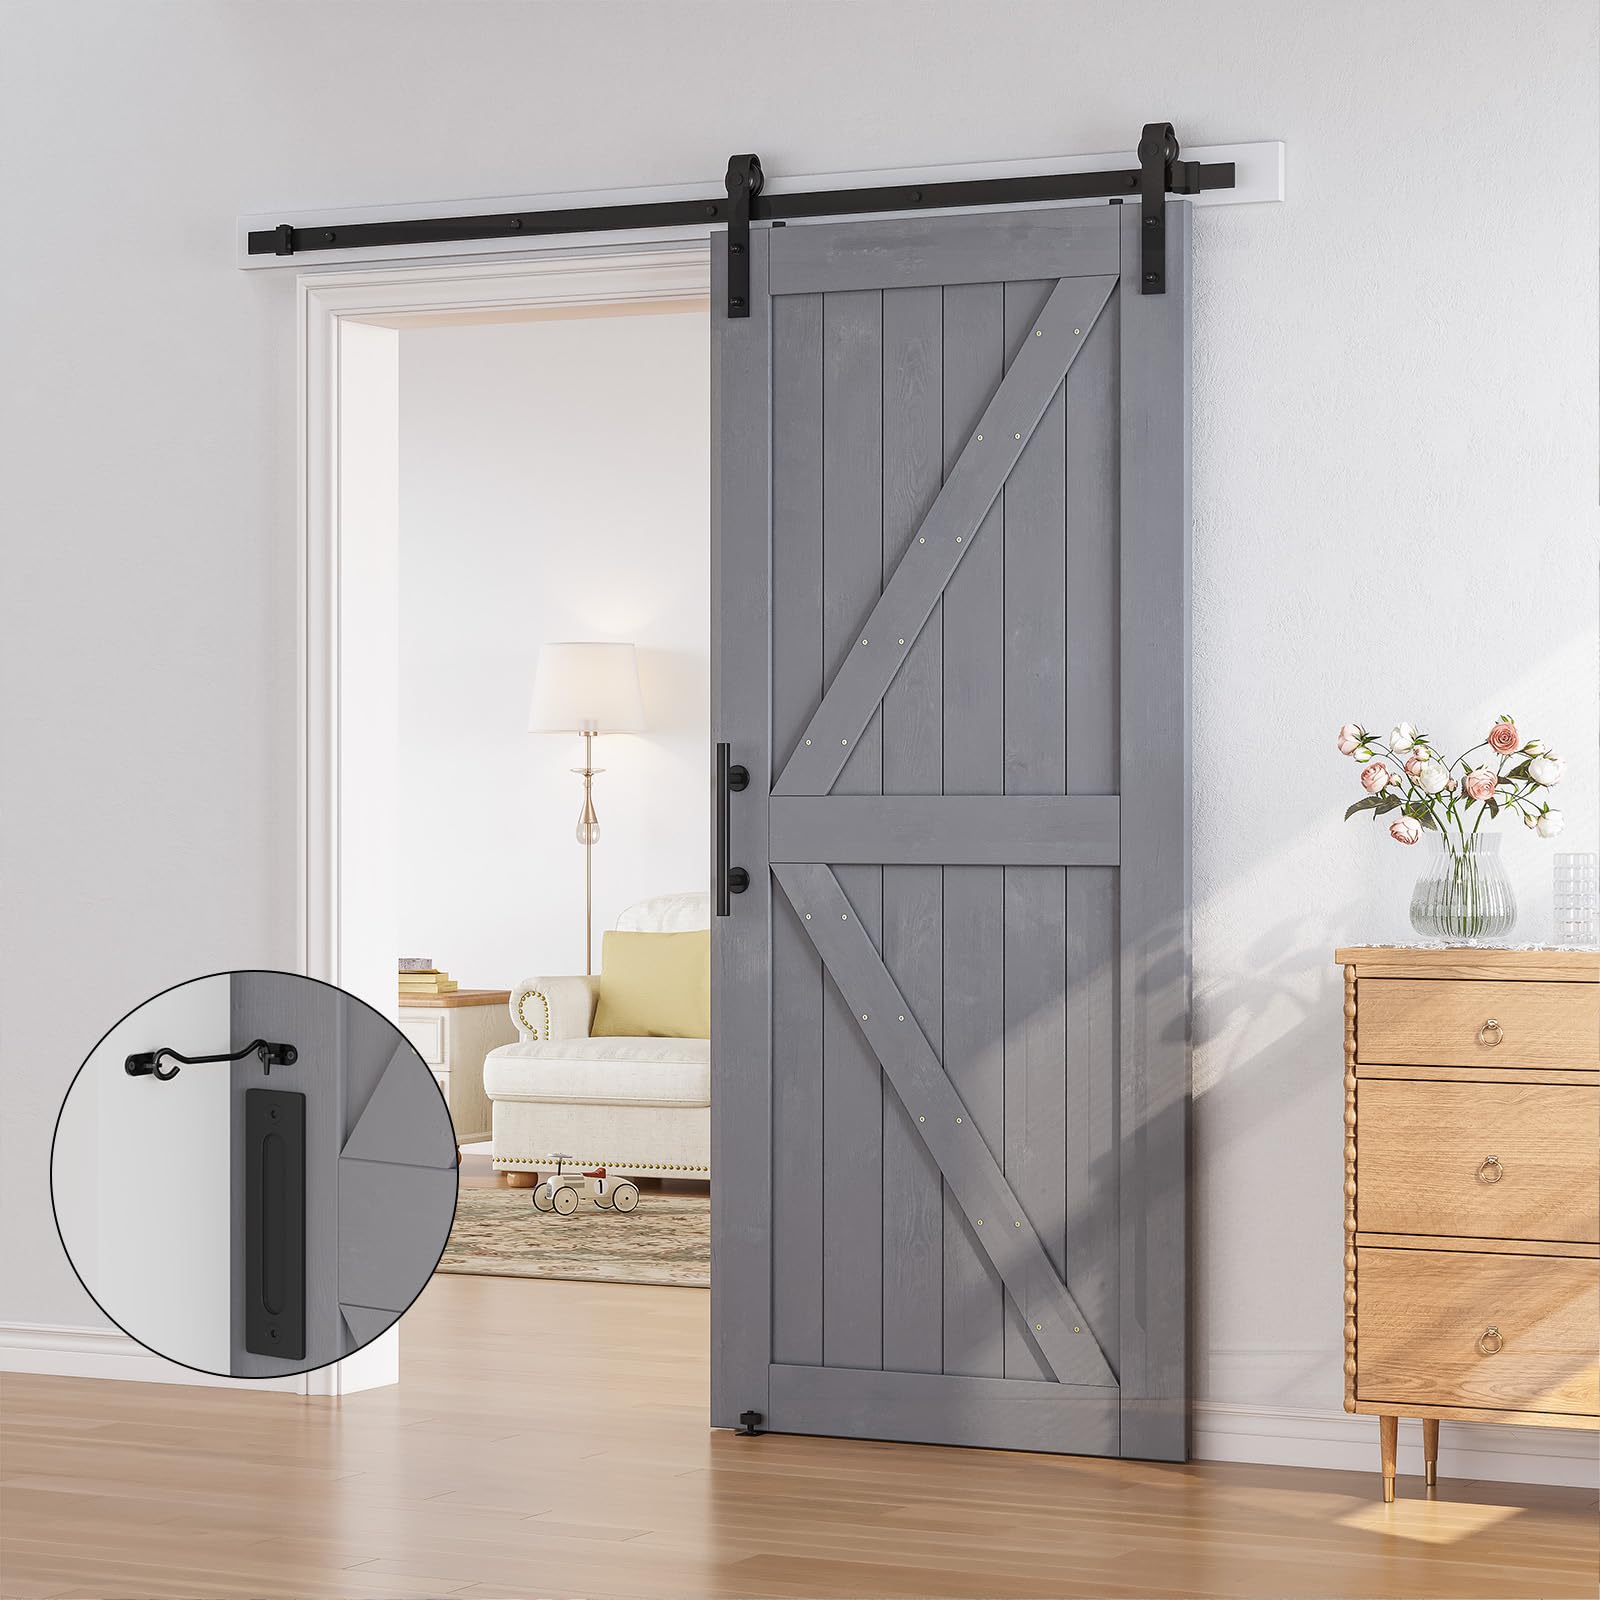 SMARTSTANDARD 36in x 84in Sliding Barn Door with 6.6ft Barn Door Hardware Kit & Handle, Pre-Drilled Ready to Assemble, DIY Unfinished Solid Spruce Wood Panelled Slab, K-Frame, Grey